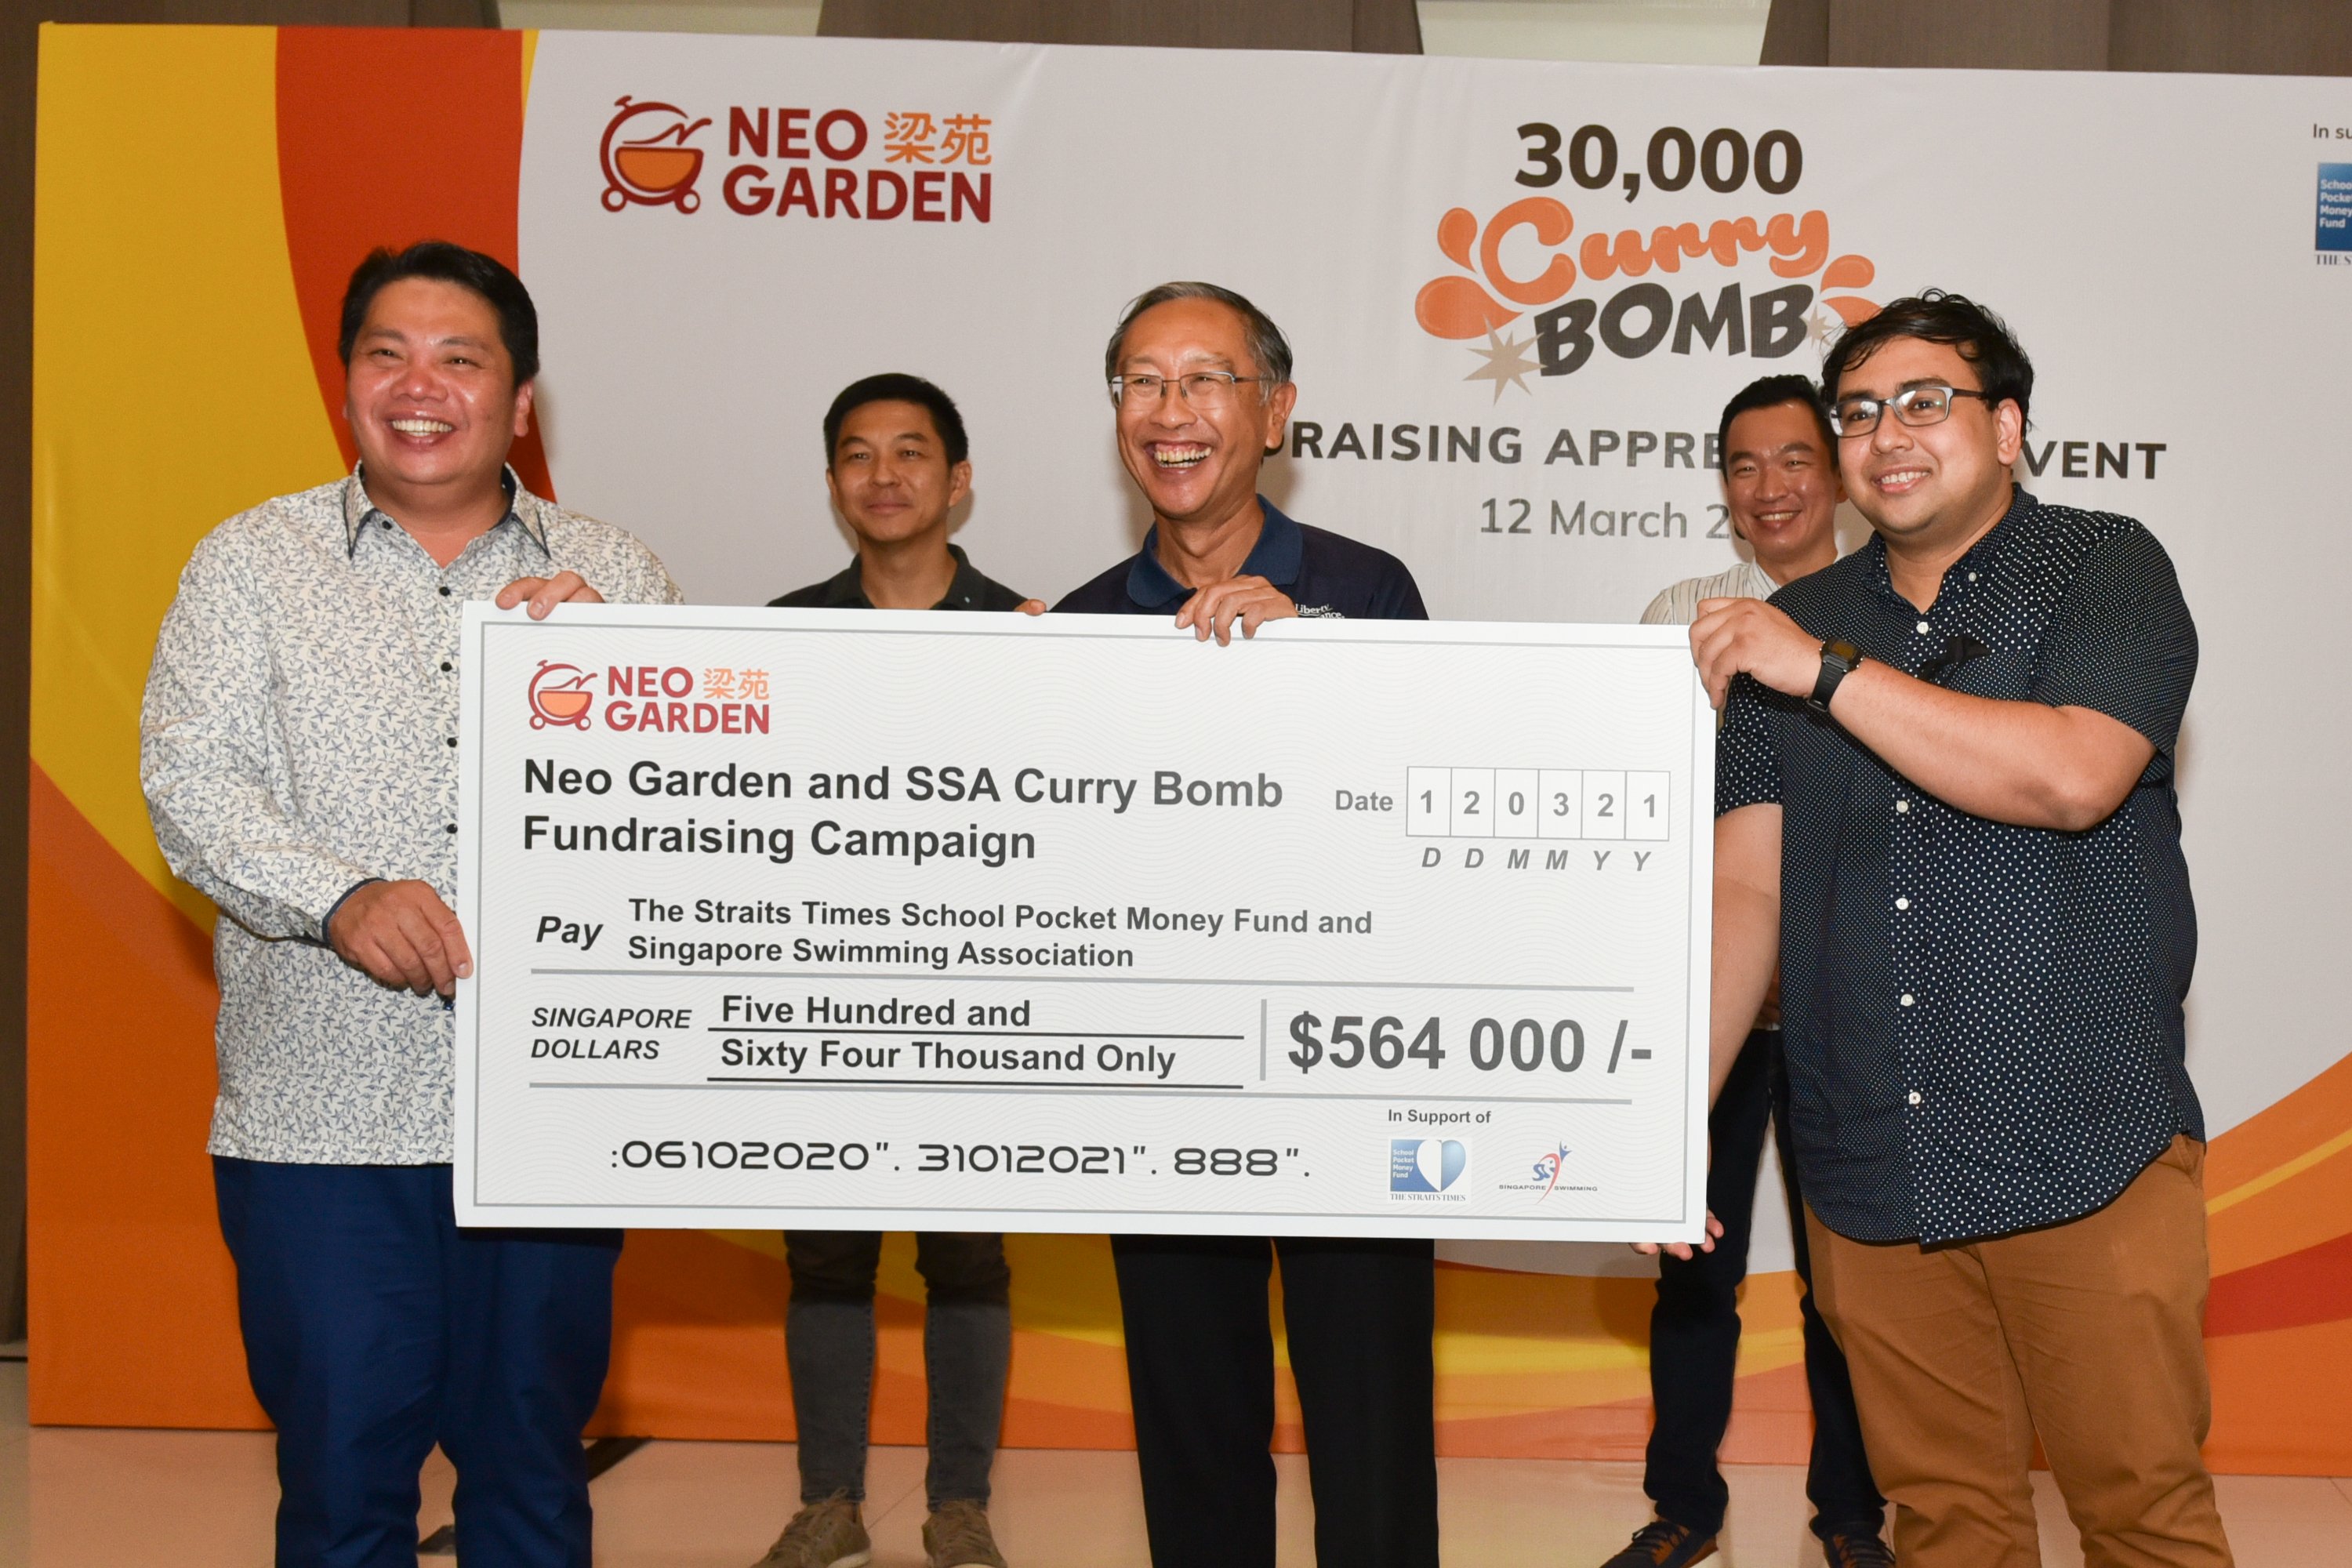 Neo Garden and SSA Curry Bomb Fundraising Campaign